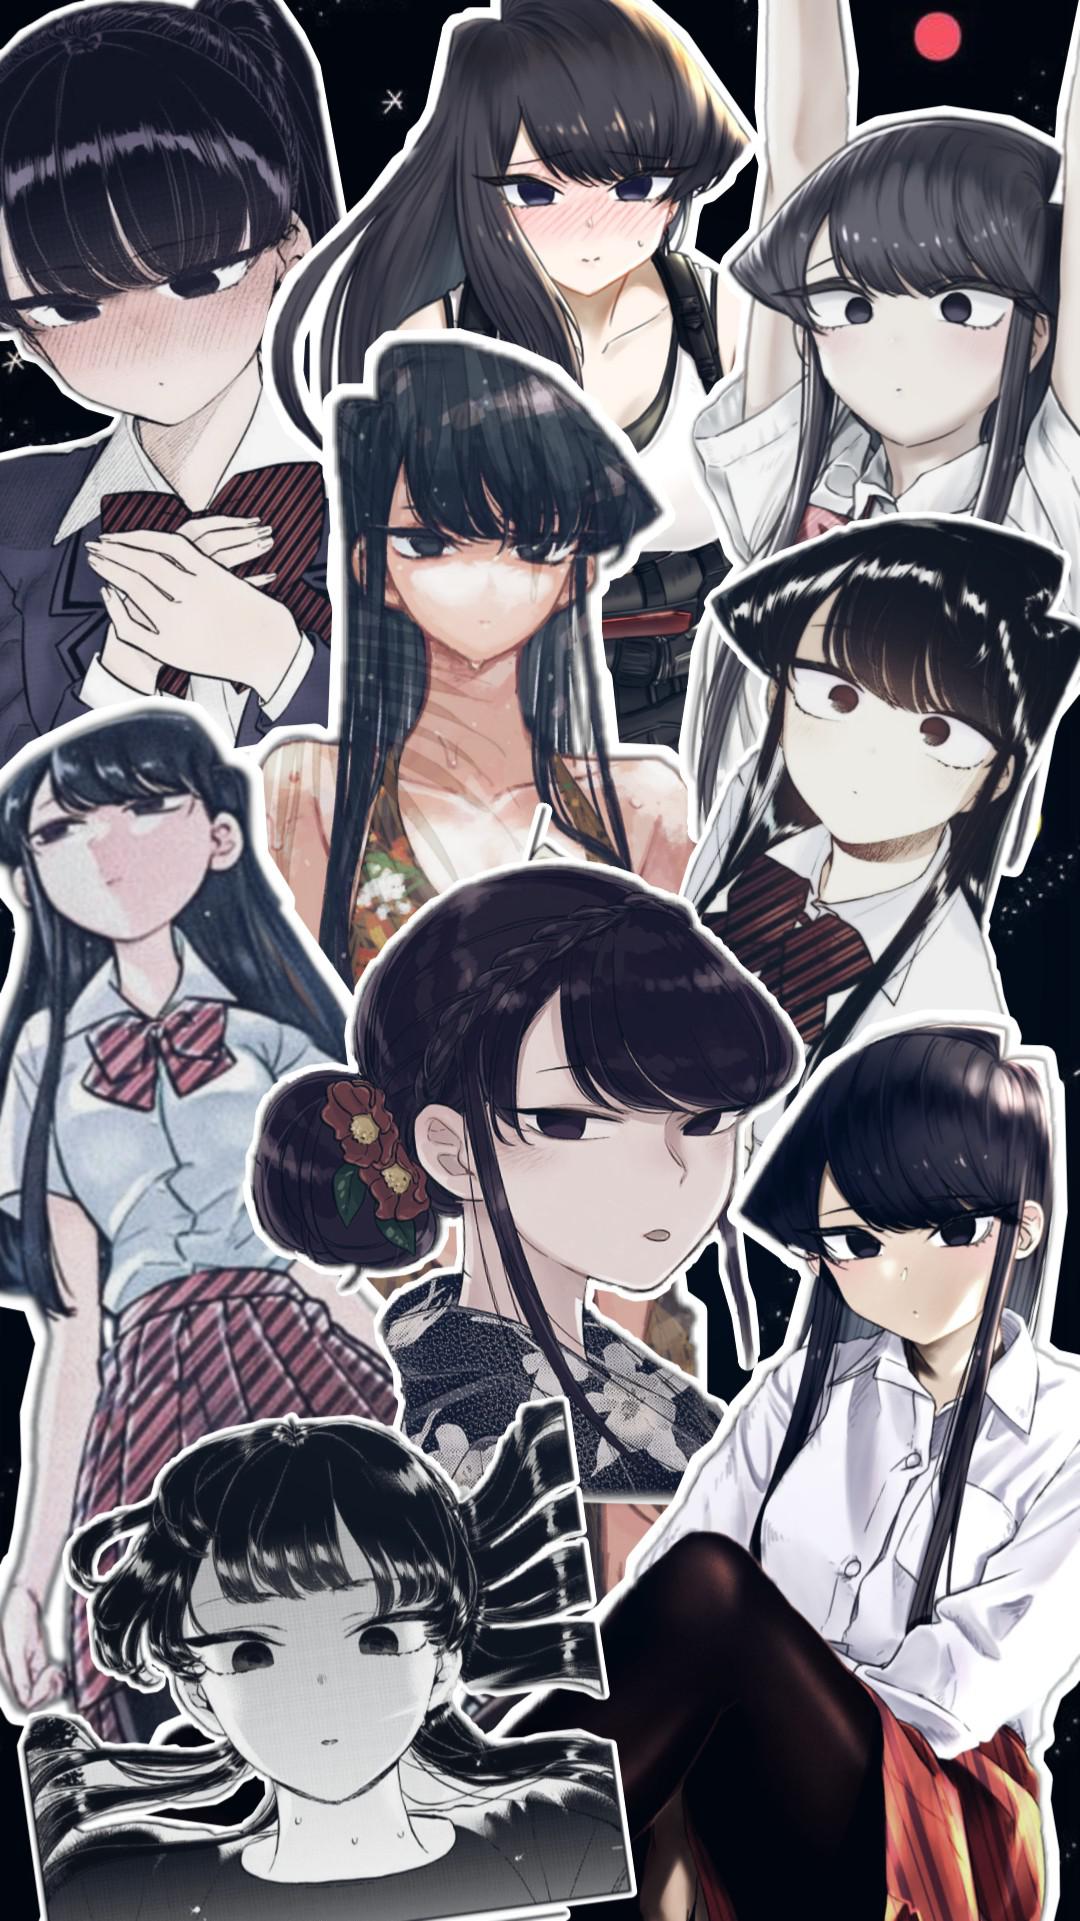 I Reread The Manga This Quarantine And I Made A Komi San Wallpaper For Y'all. Feel Free To Use It Of You Want, Also I'm Not That Good At Editing. My Apologies